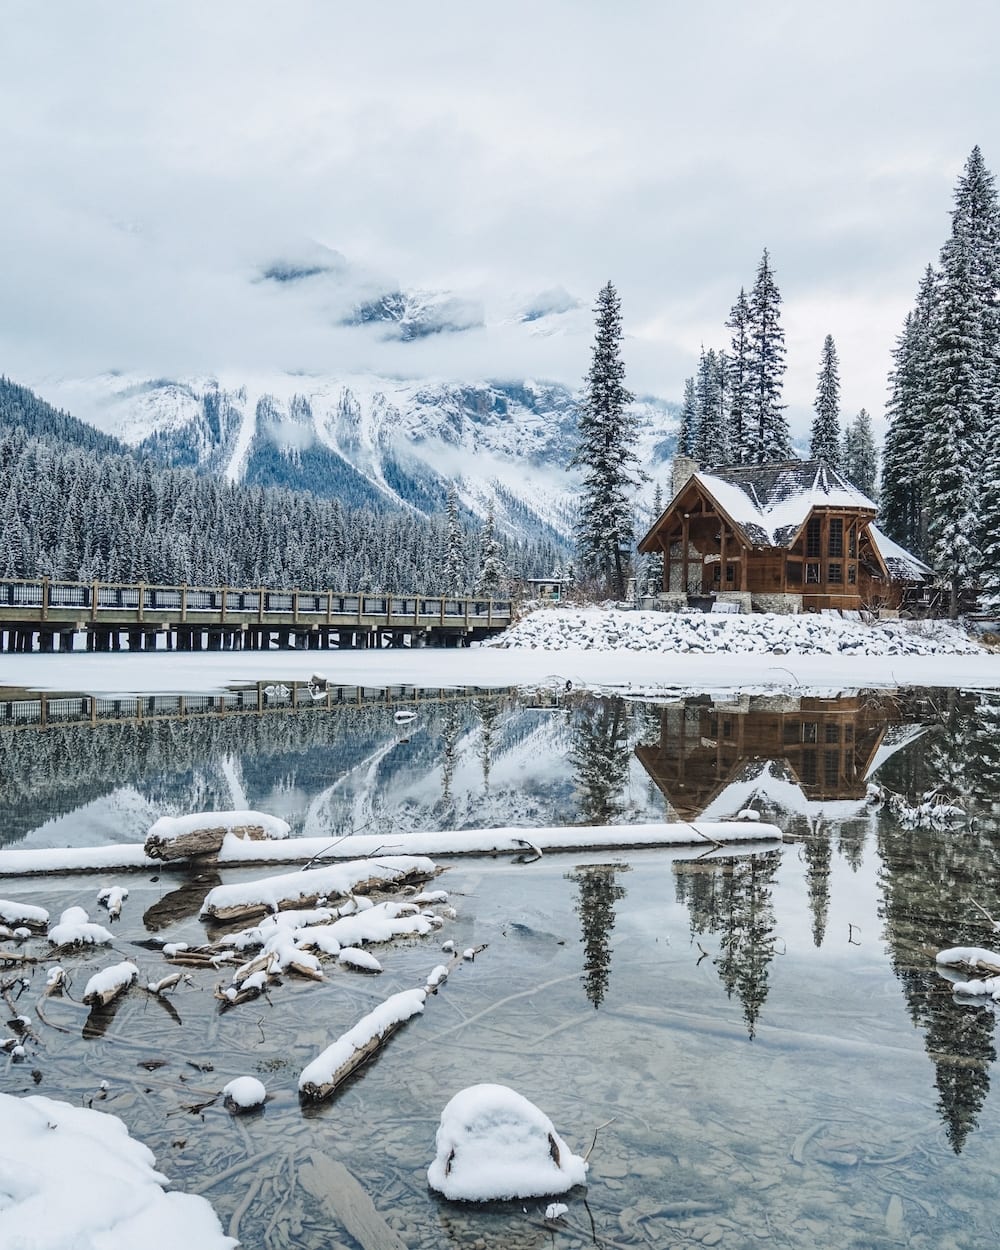 Everything You Need to Know About Visiting Banff and Jasper in Winter